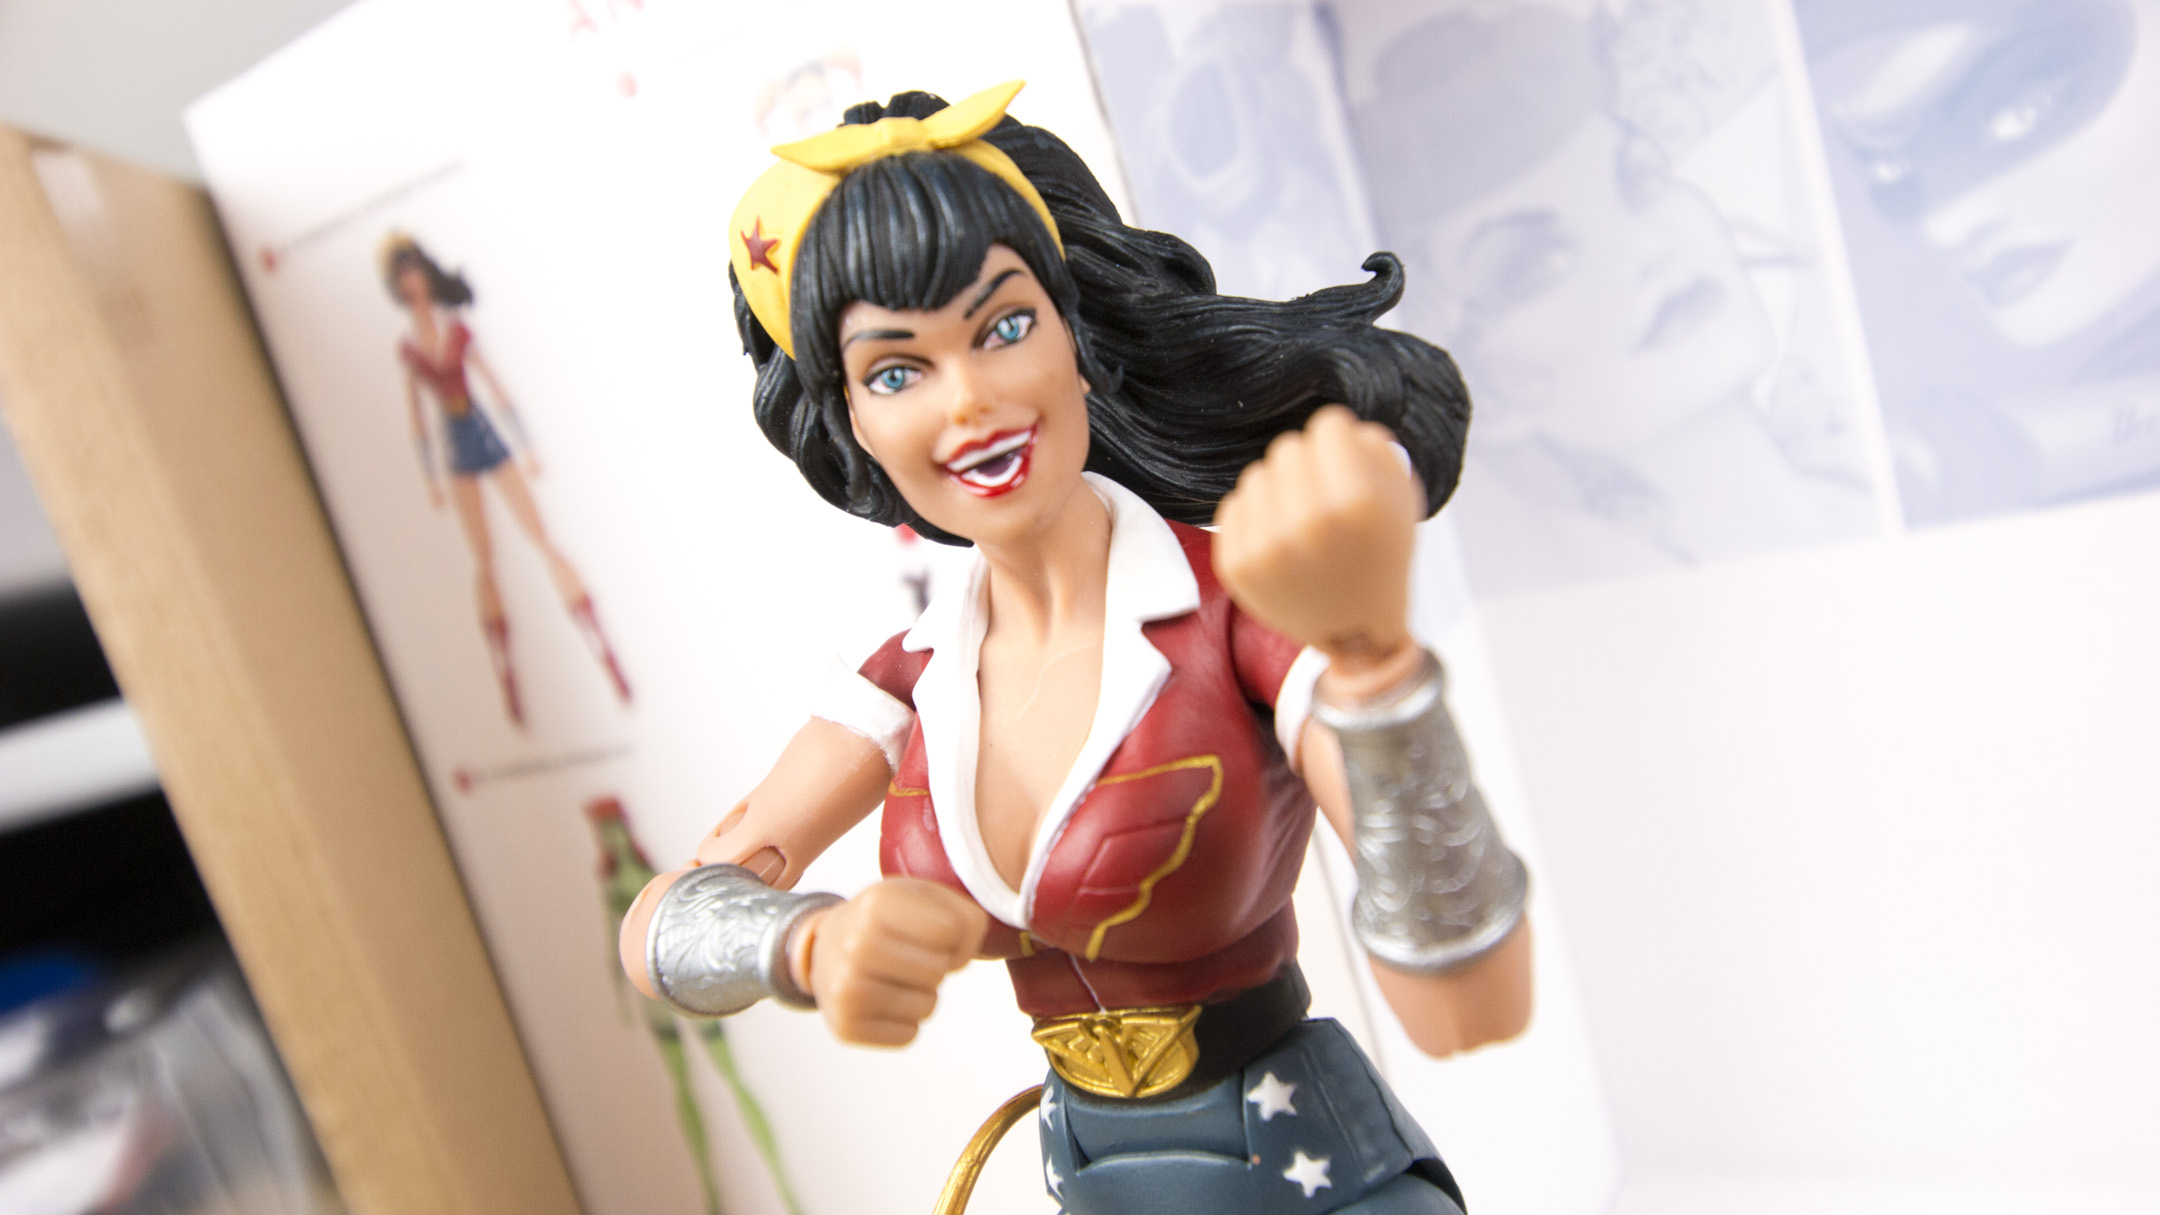 DC Comics Bombshells Action Figures Are Mostly Great 